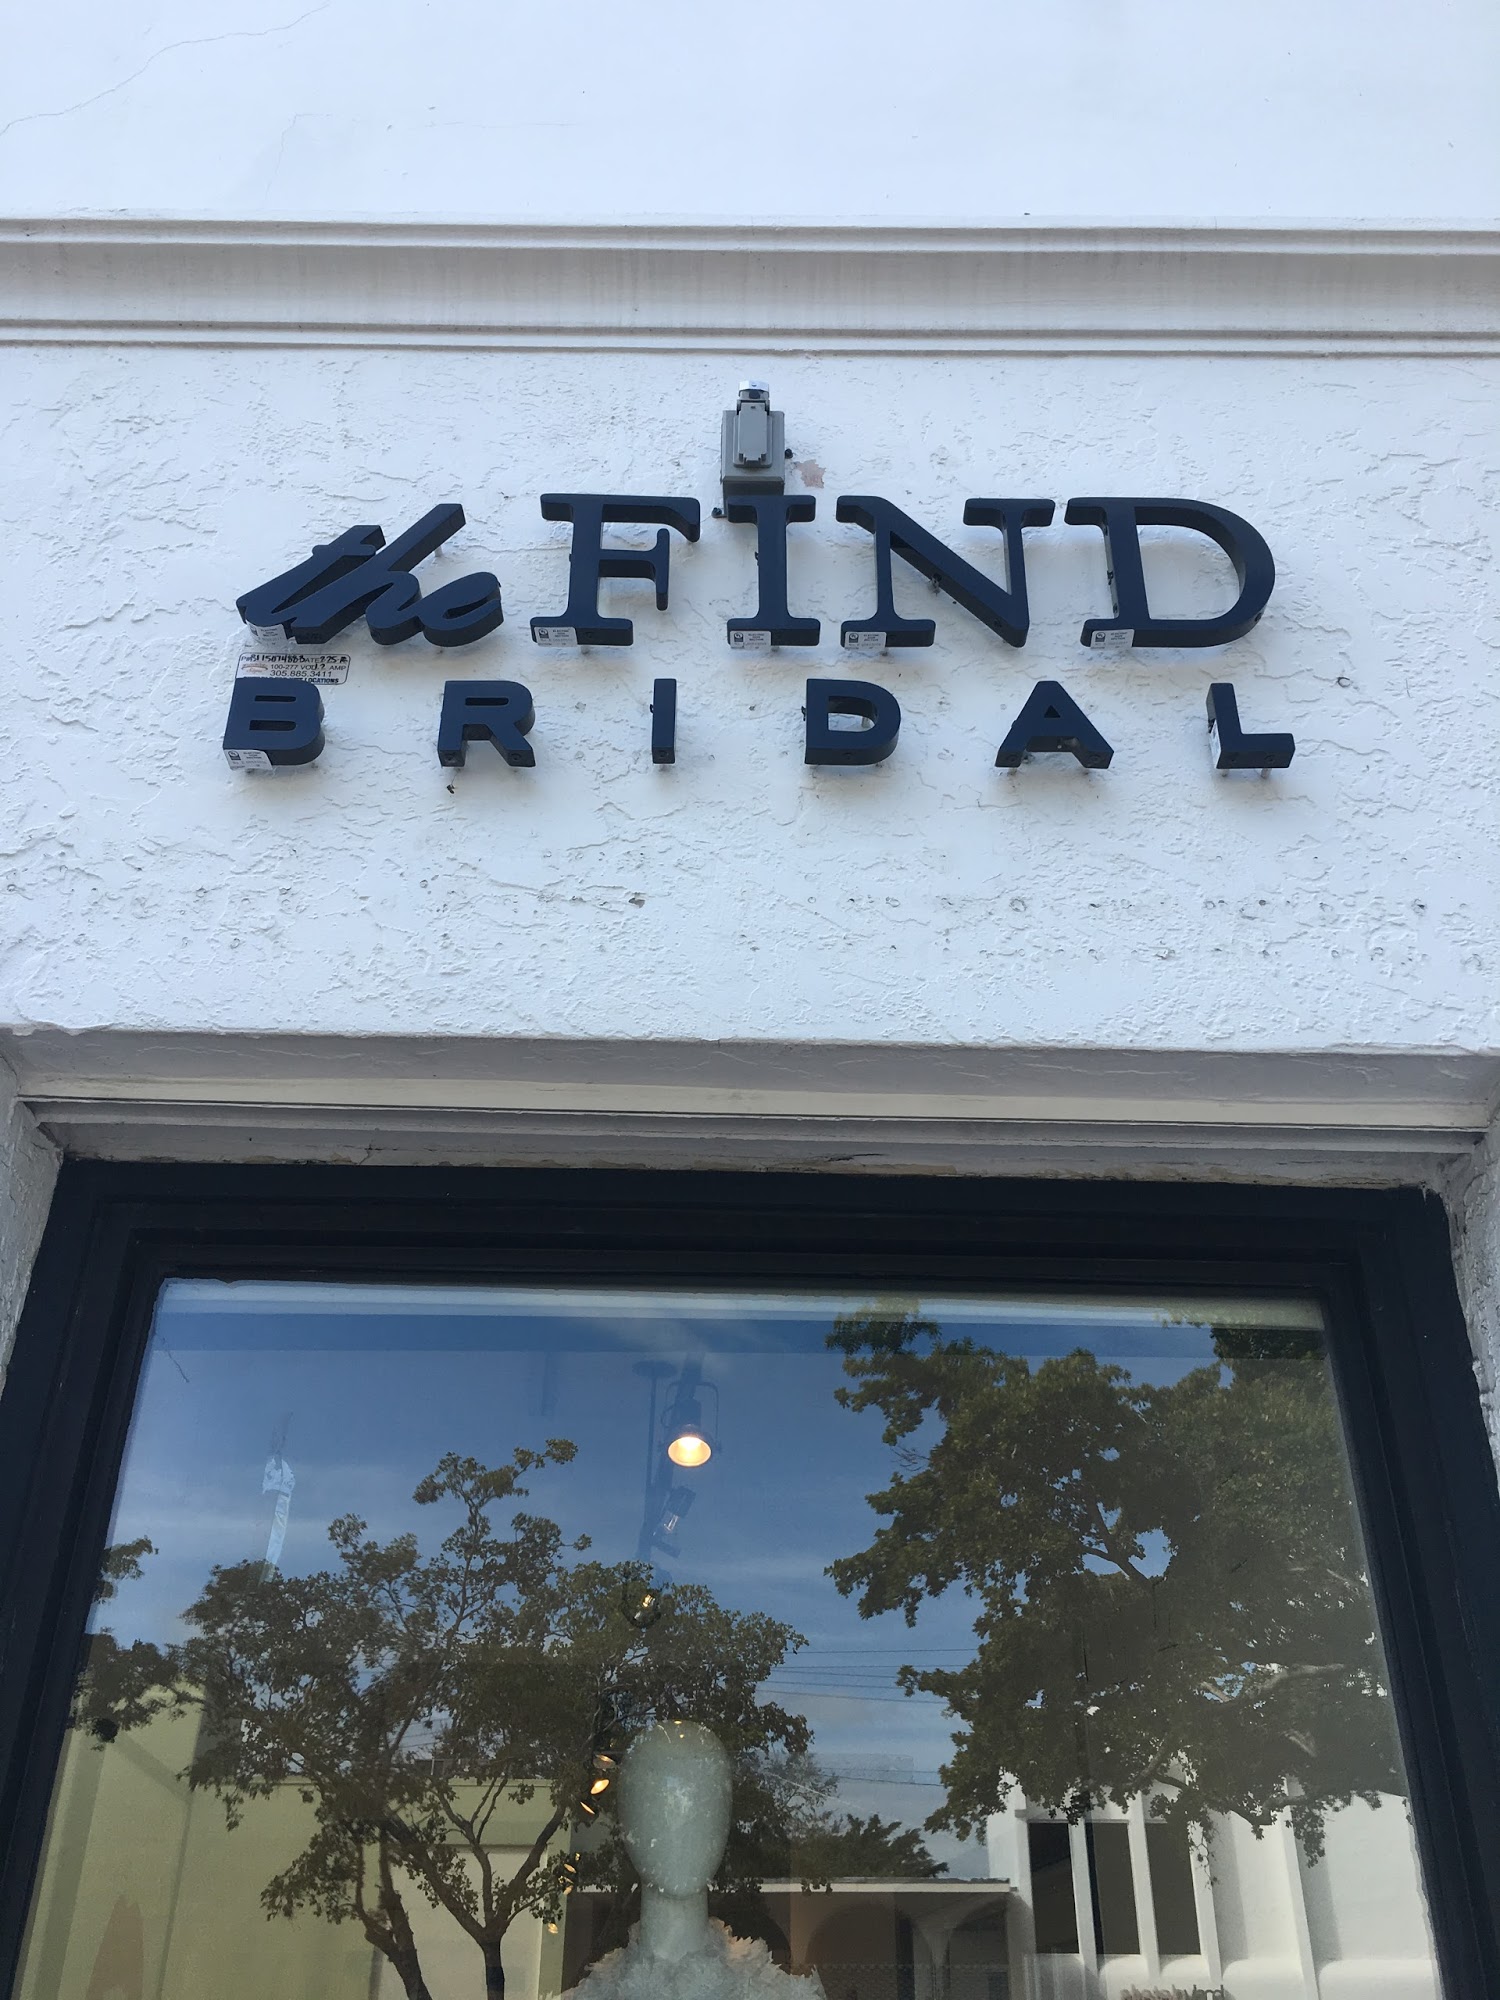 The Find Bridal